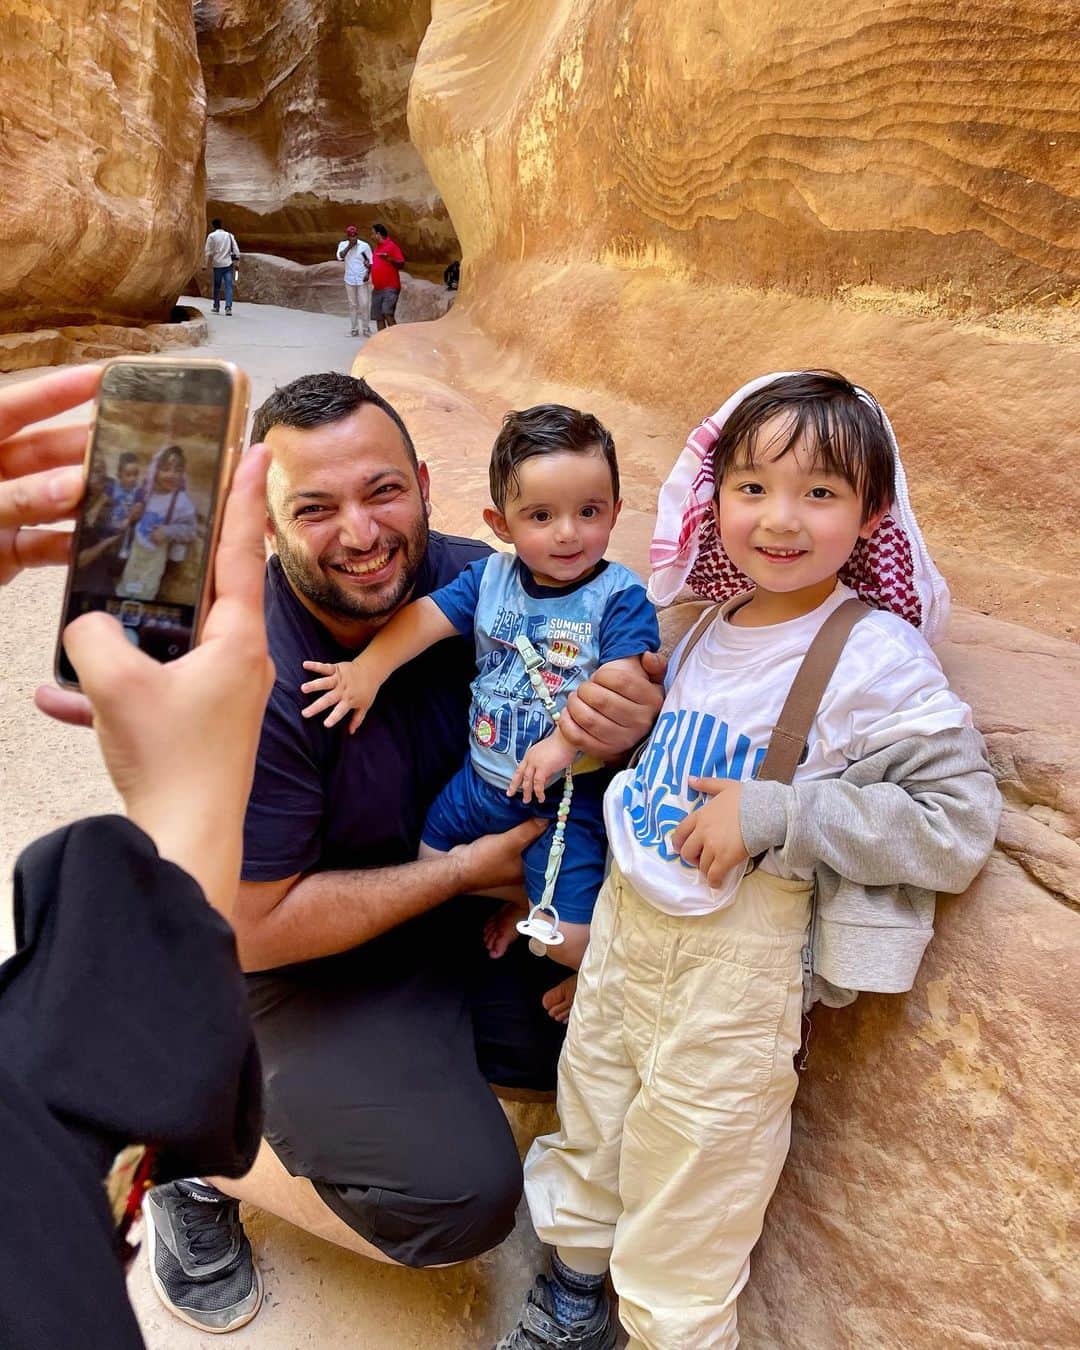 石塚錬さんのインスタグラム写真 - (石塚錬Instagram)「WORLD TOUR DAY11 〜ヨルダン🇯🇴編〜 👦💬「I'm in ペトラ❣️ 中東のヨルダンにきました🇯🇴✈️ 遺跡の神殿をみたときは思わずワッて声がでました🥺 気温は40℃以上あってさすがにラクダさんも暑そうでした🐪 ターバンを巻いて色んな人と写真を撮りました🤳👳(これも帽子のお土産です🧢)」 . （👨パパ通信📨）ドイツ経由で7時間、ヨルダンに到着しました✈️🇯🇴。ペトラはインディジョーンズの舞台になった遺跡で、岩壁を削って大都市を作ったそうです(世界遺産)。レンはターバン効果か沢山の人に声をかけられていました🤳特にほっぺたが大人気でした笑 . 👦💬 「I'm in Petra❣️ I'm in Jordan in the Middle East🇯🇴✈️ I couldn't help but gasp when I saw the temple🥺. The temperature was over 40 degrees Celsius and even the camels looked hot🐪. I took pictures with many people wearing turbans🤳👳(This is also a souvenir of my hat. It's also a souvenir of the hat 🧢)」 . (👨Papa News 📨) It is the site where Indiana Jones was set (World Heritage Site)🇯🇴. They built a big city by carving out a rock wall. It took about 7 hours to get to Jordan via Germany. Ren was approached by many people, probably due to the turban effect🤳. His cheeks were especially popular lol. . #男旅 #世界一周 #旅 #ヨルダン  #旅行 #ペトラ遺跡 #砂漠 #中東 #ラクダ #ターバン #インディジョーンズ #世界遺産 #Mantrip #aroundtheworldtrip #trip #middleeast #Jordan #petra #camel #worldhelitage #여행 #남자여행 #การเดินทาง #ทริปผู้ชาย #Perjalanan #石塚錬 #成長日記 #ishizukaren #renishizuka #이시즈카렌」8月15日 18時59分 - ishizuka_ren